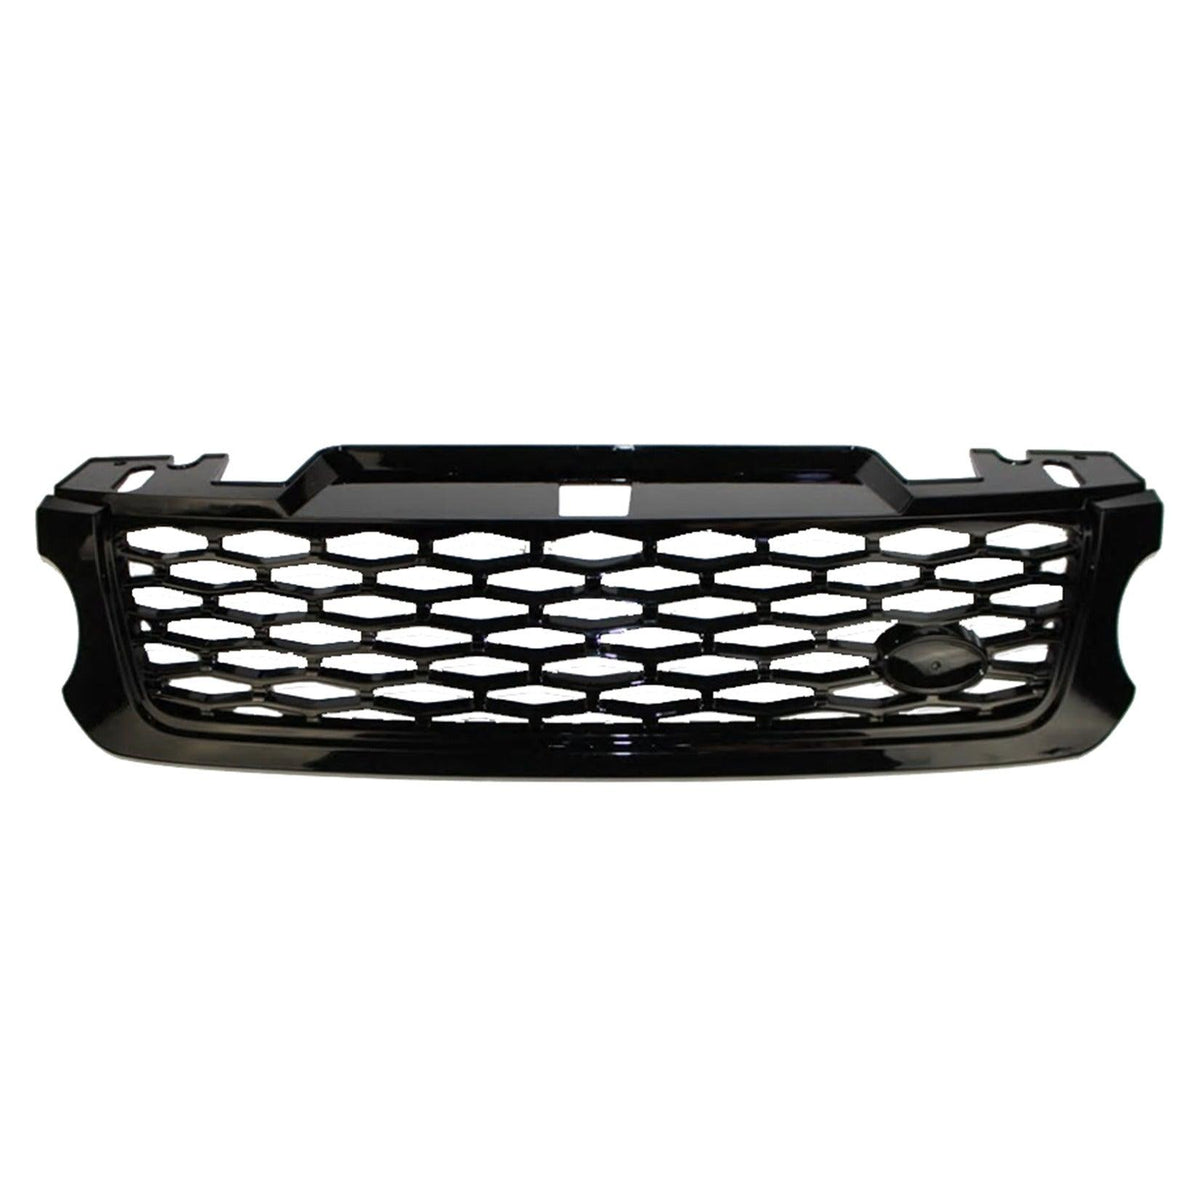 RANGE ROVER SPORT 2014 - 2017 - L494 - FRONT GRILLE - SVR STYLE UPGRADE - GLOSS BLACK - Storm Xccessories2